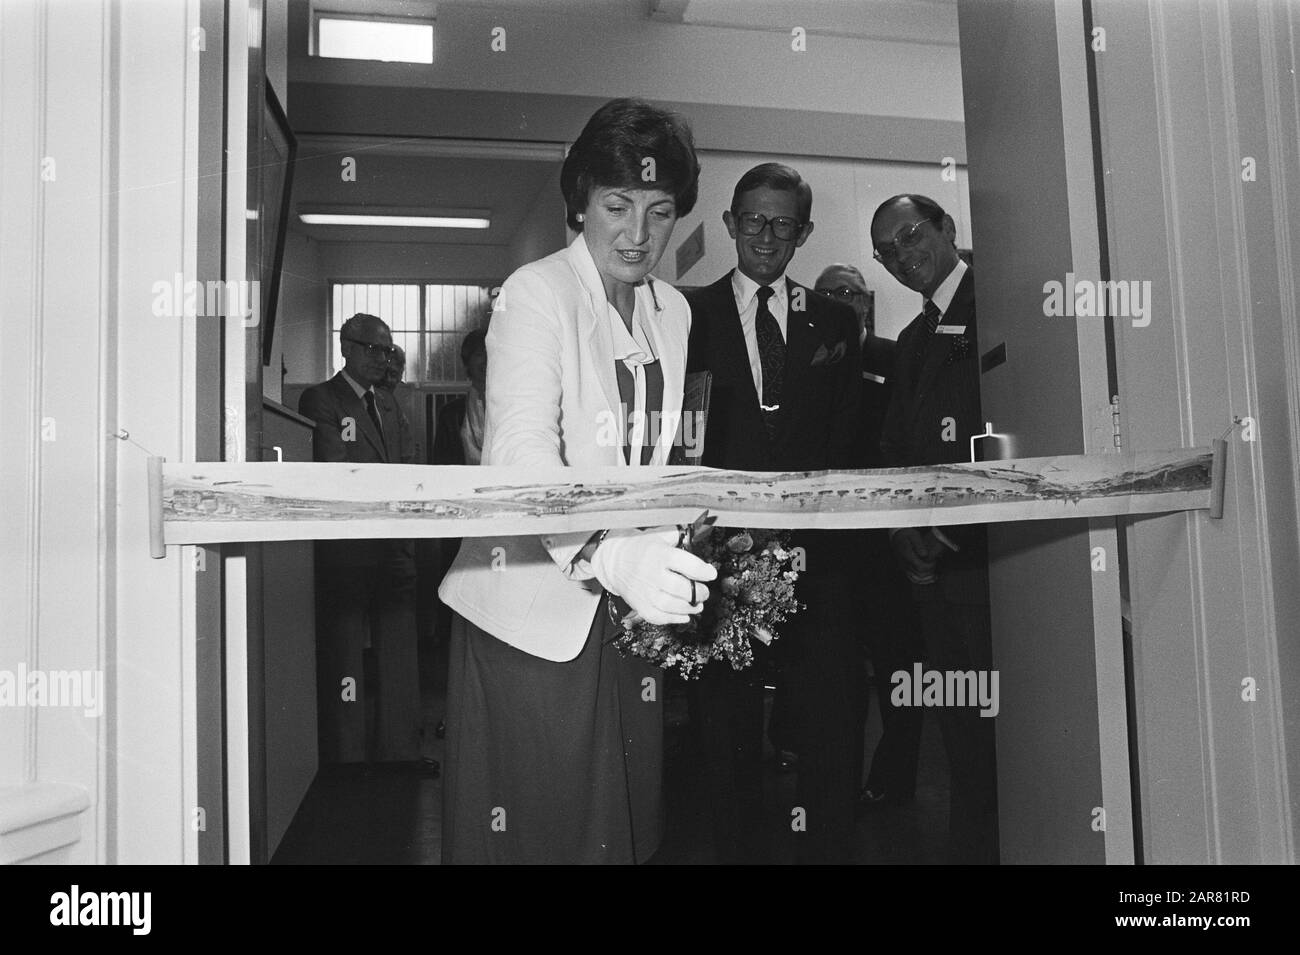 Official opening exhibition Panorama Phenomenon in the Panorama Mesdag by Princess Margriet and Pieter van Vollenhoven  Princess Margriet cuts a ribbon at the opening, Pieter van Vollenhove and drs. Hoetink watch Date: 25 september 1981 Location: The Hague, Zuid-Holland Keywords: openings, princesses, exhibitions Personal name: Hoetink, H.R., Margriet, princess, Vollenhove, Pieter van Institutioningsnaam: Panorama Mesdag Stock Photo